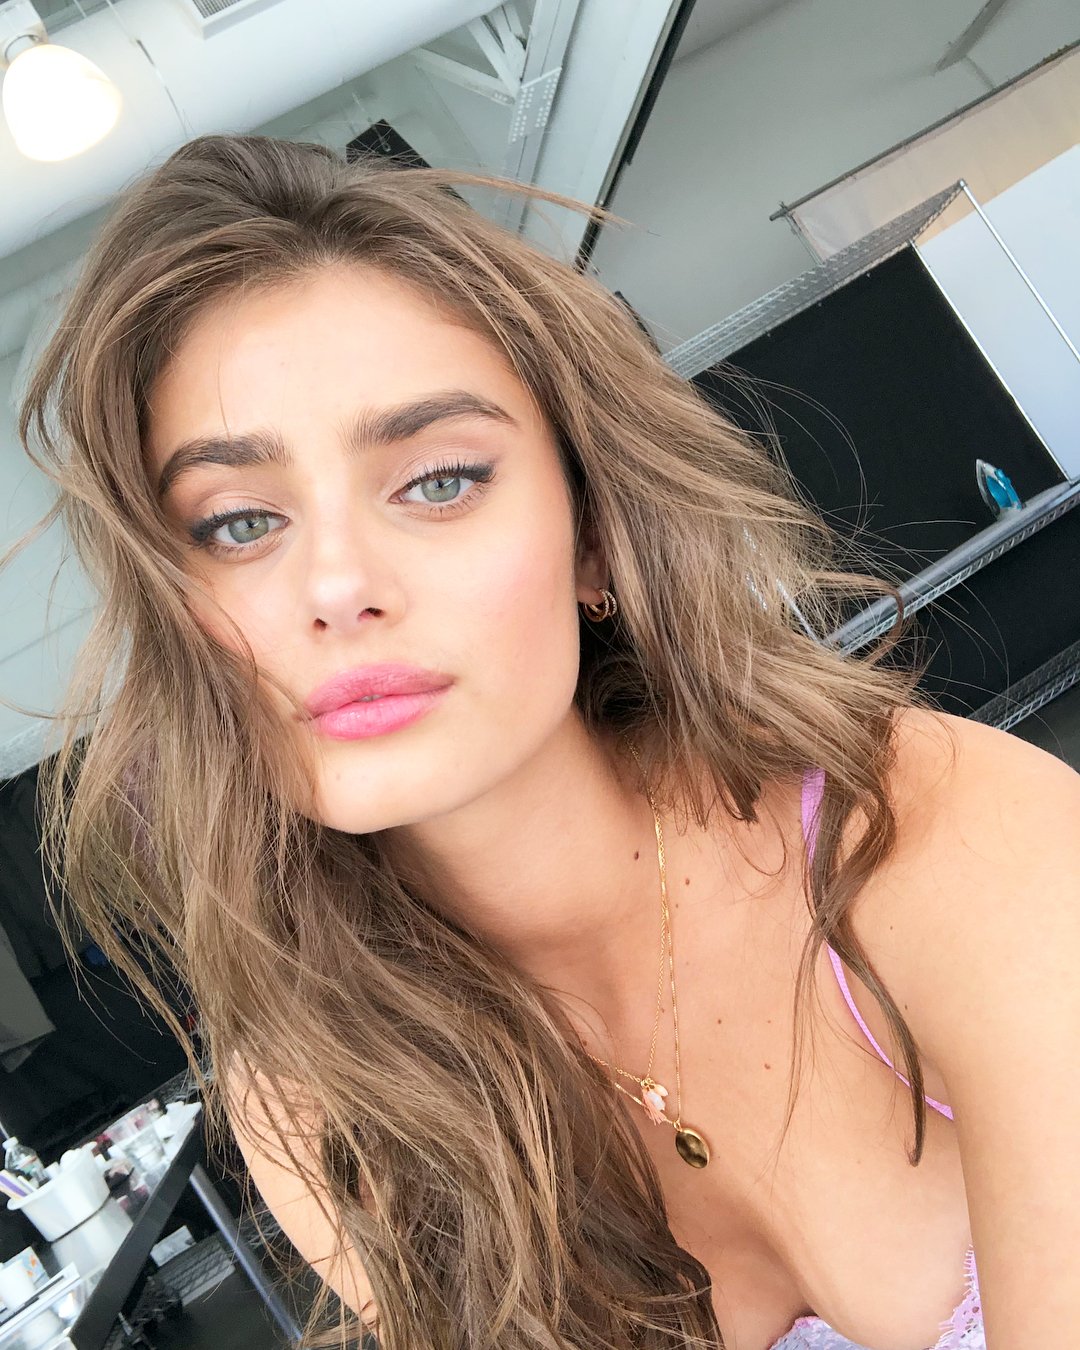 Taylor Hill has posted a photo on Instagram with the following remarks: @victoriassecret Twitter, 2018-04-10 10:59:06. Photo supplied by insight media. Service fee applies. NICHT ZUR VERÃFFENTLICHUNG IN BÃCHERN UND BILDBÃNDEN! EDITORIAL USE ONLY! / MAY NOT BE PUBLISHED IN BOOKS AND ILLUSTRATED BOOKS! Please note: Fees charged by the agency are for the agencyâs services only, and do not, nor are they intended to, convey to the user any ownership of Copyright or License in the material. The agency does not claim any ownership including but not limited to Copyright or License in the attached material. By publishing this material you expressly agree to indemnify and to hold the agency and its directors, shareholders and employees harmless from any loss, claims, damages, demands, expenses (including legal fees), or any causes of action or allegation against the agency arising out of or connected in any way with publication of the material., Image: 368154662, License: Rights-managed, Restrictions: NICHT ZUR VERÃFFENTLICHUNG IN BÃCHERN UND BILDBÃNDEN! Please note additional conditions in the caption, Model Release: no, Credit line: Profimedia, Insight Media